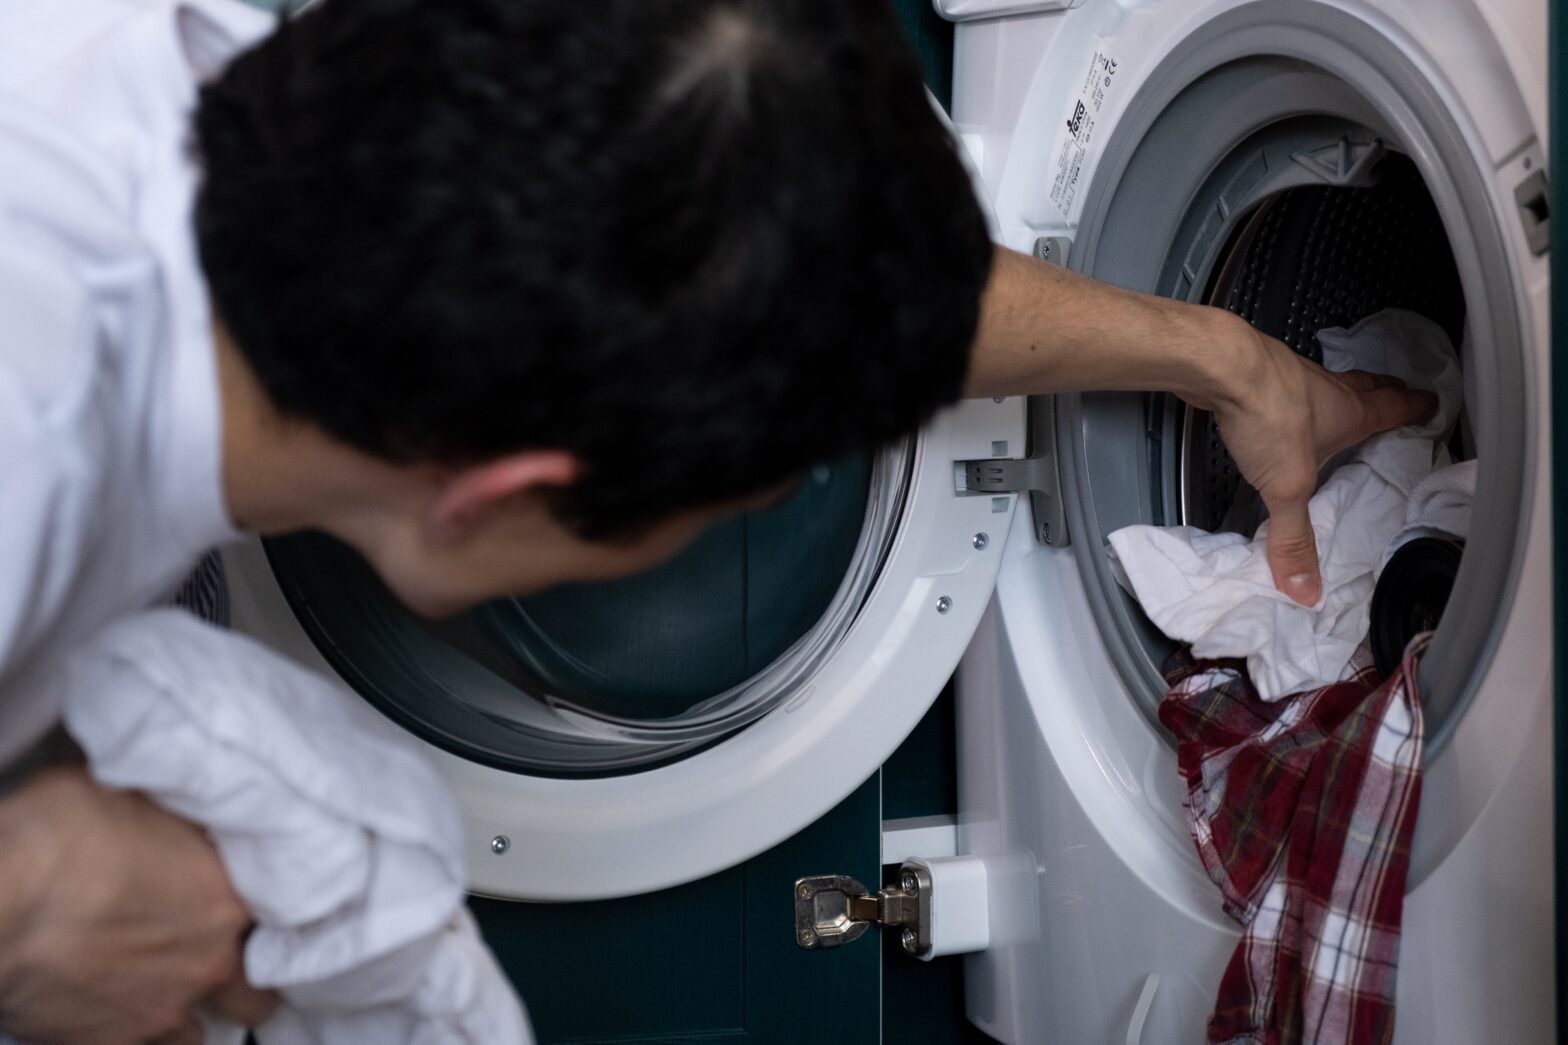 Laundry Day! Is Overloading your Washer and Dryer Really That Bad?